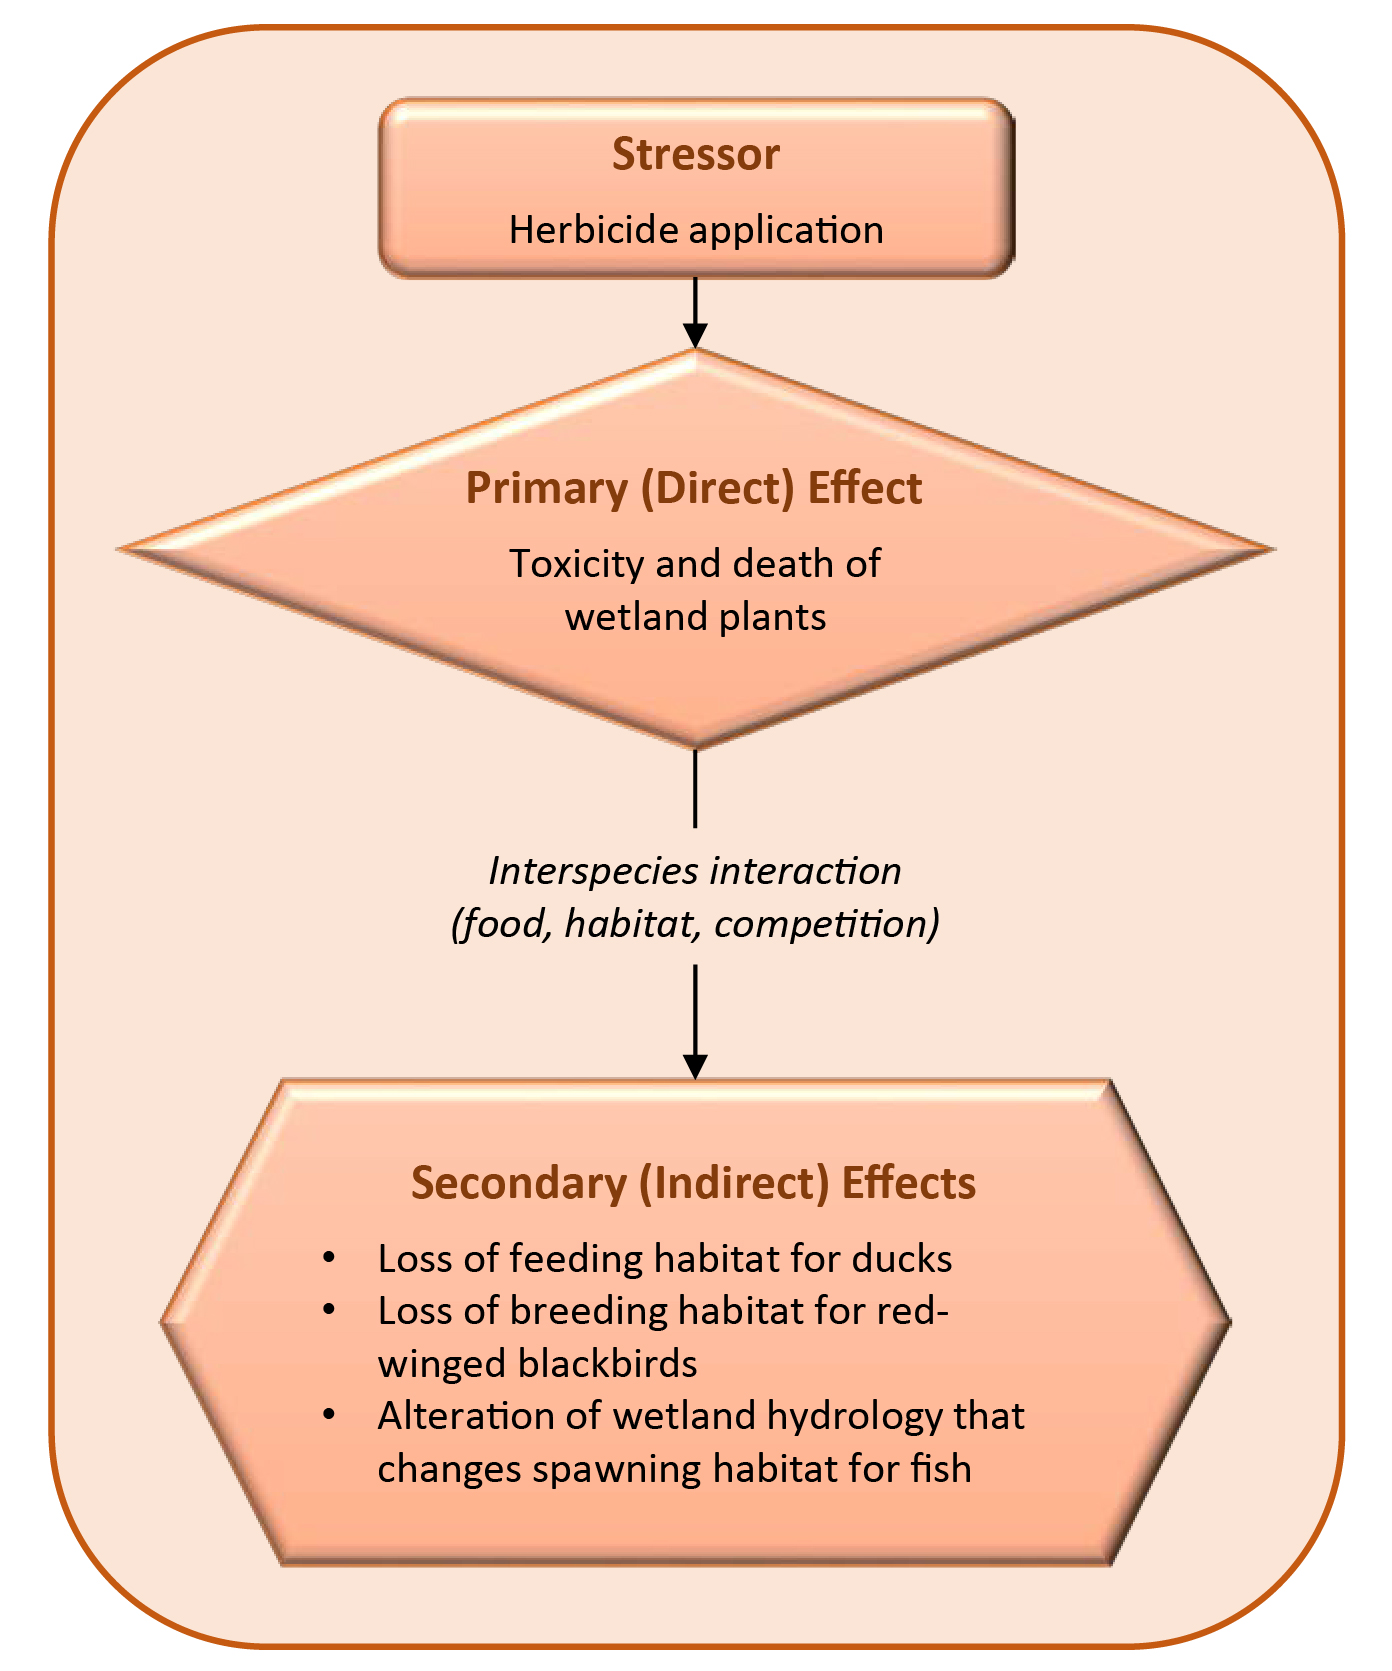   Primary and Secondary Effects